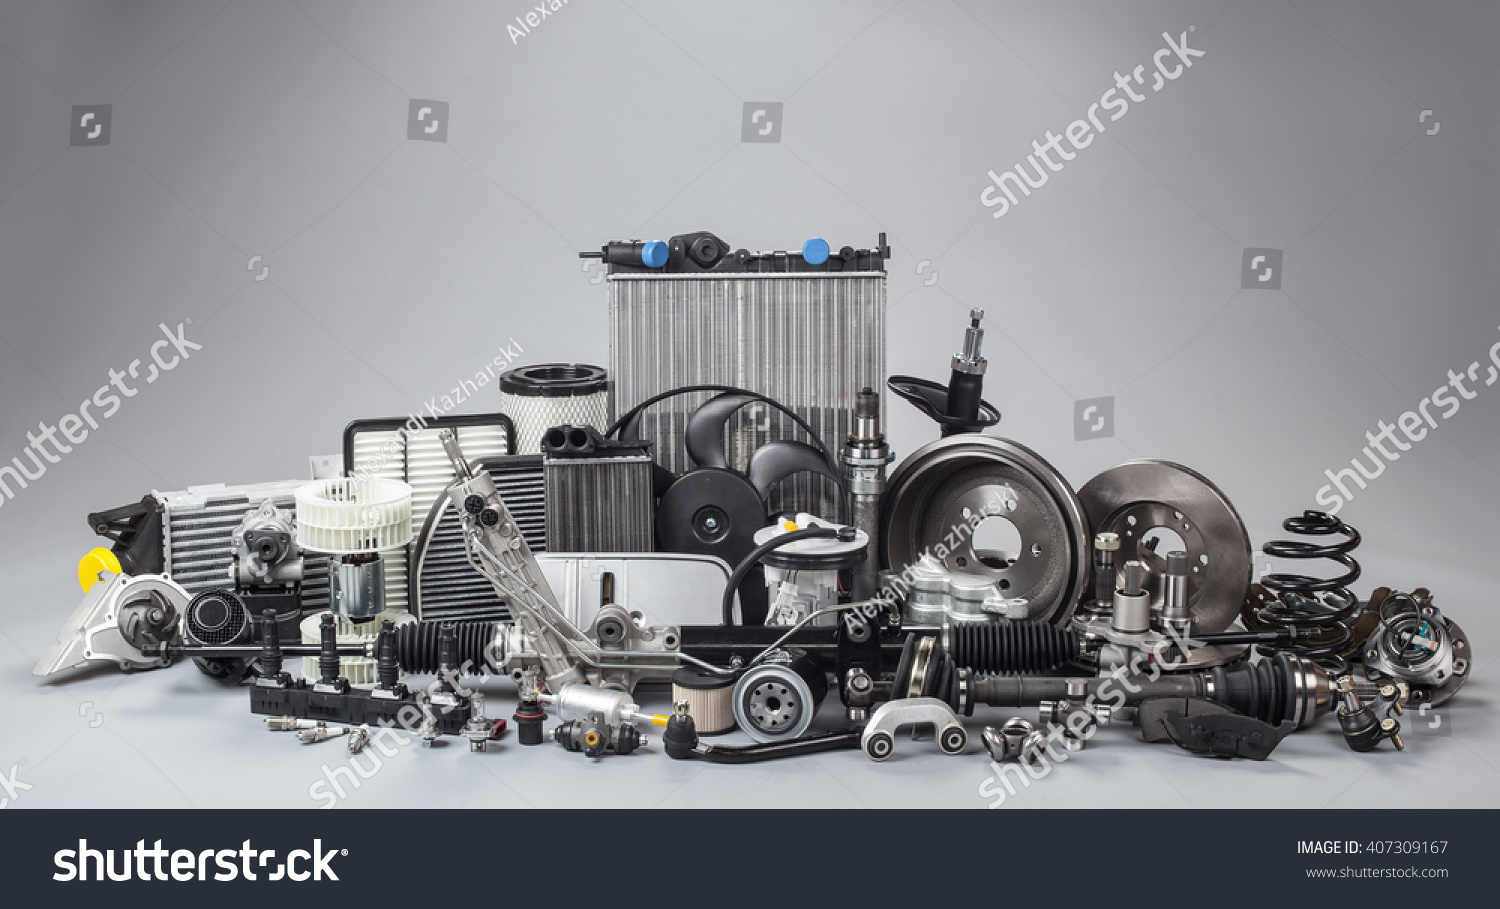 car parts on a gray background #407309167